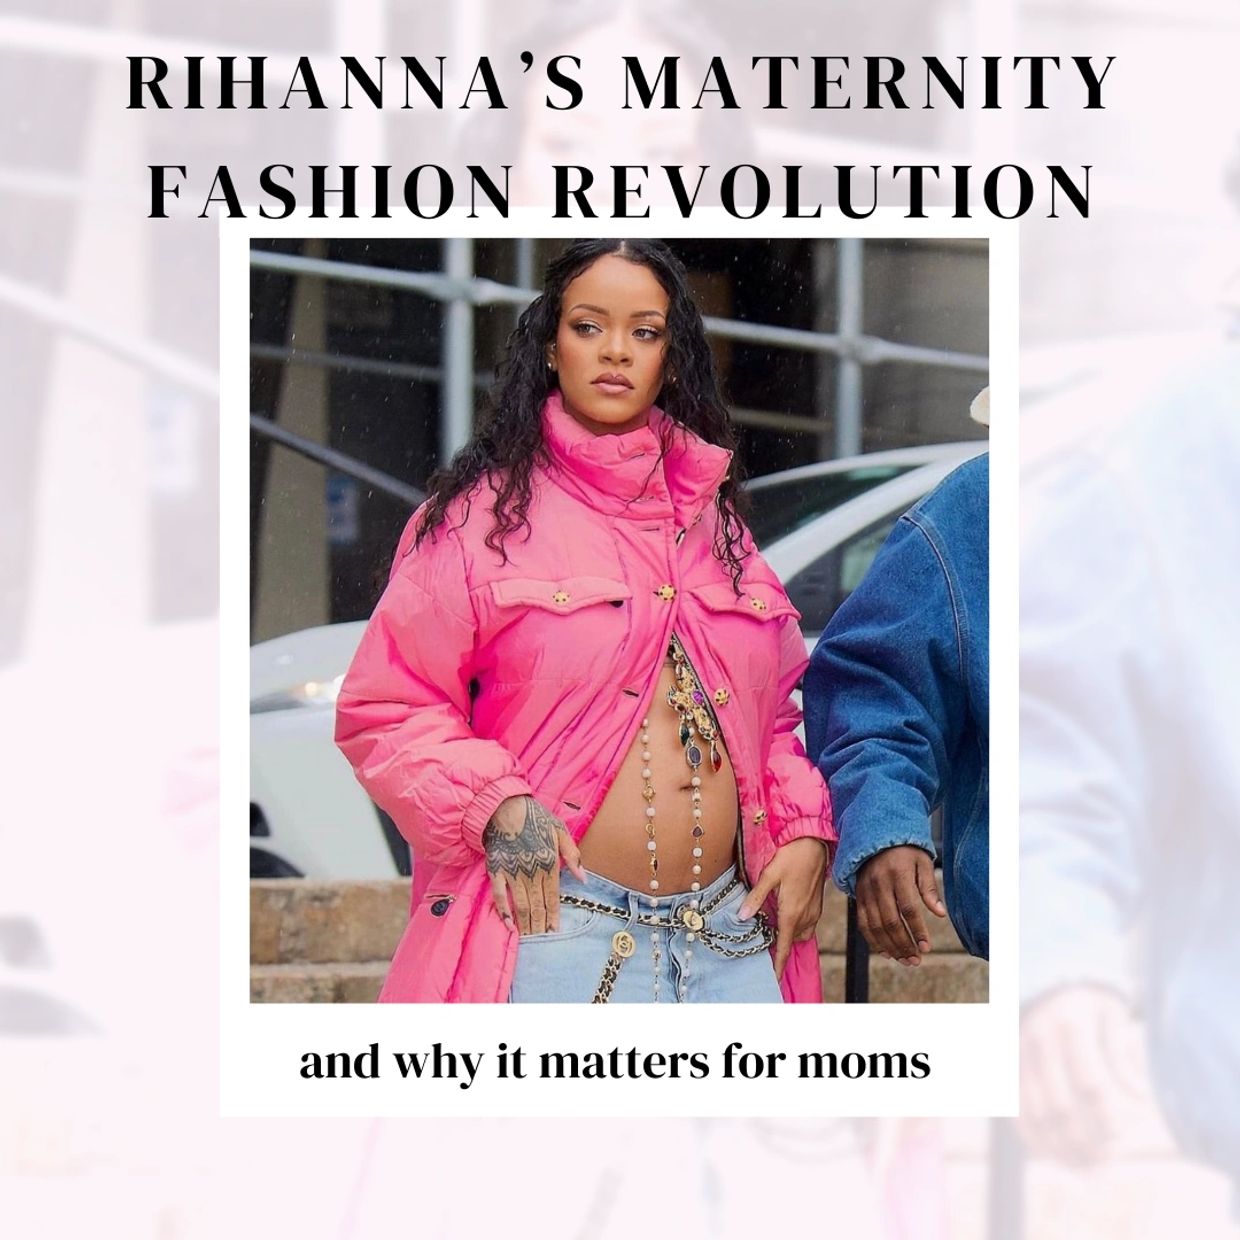 Rihanna's Maternity Fashion Revolution and why it matters for moms.